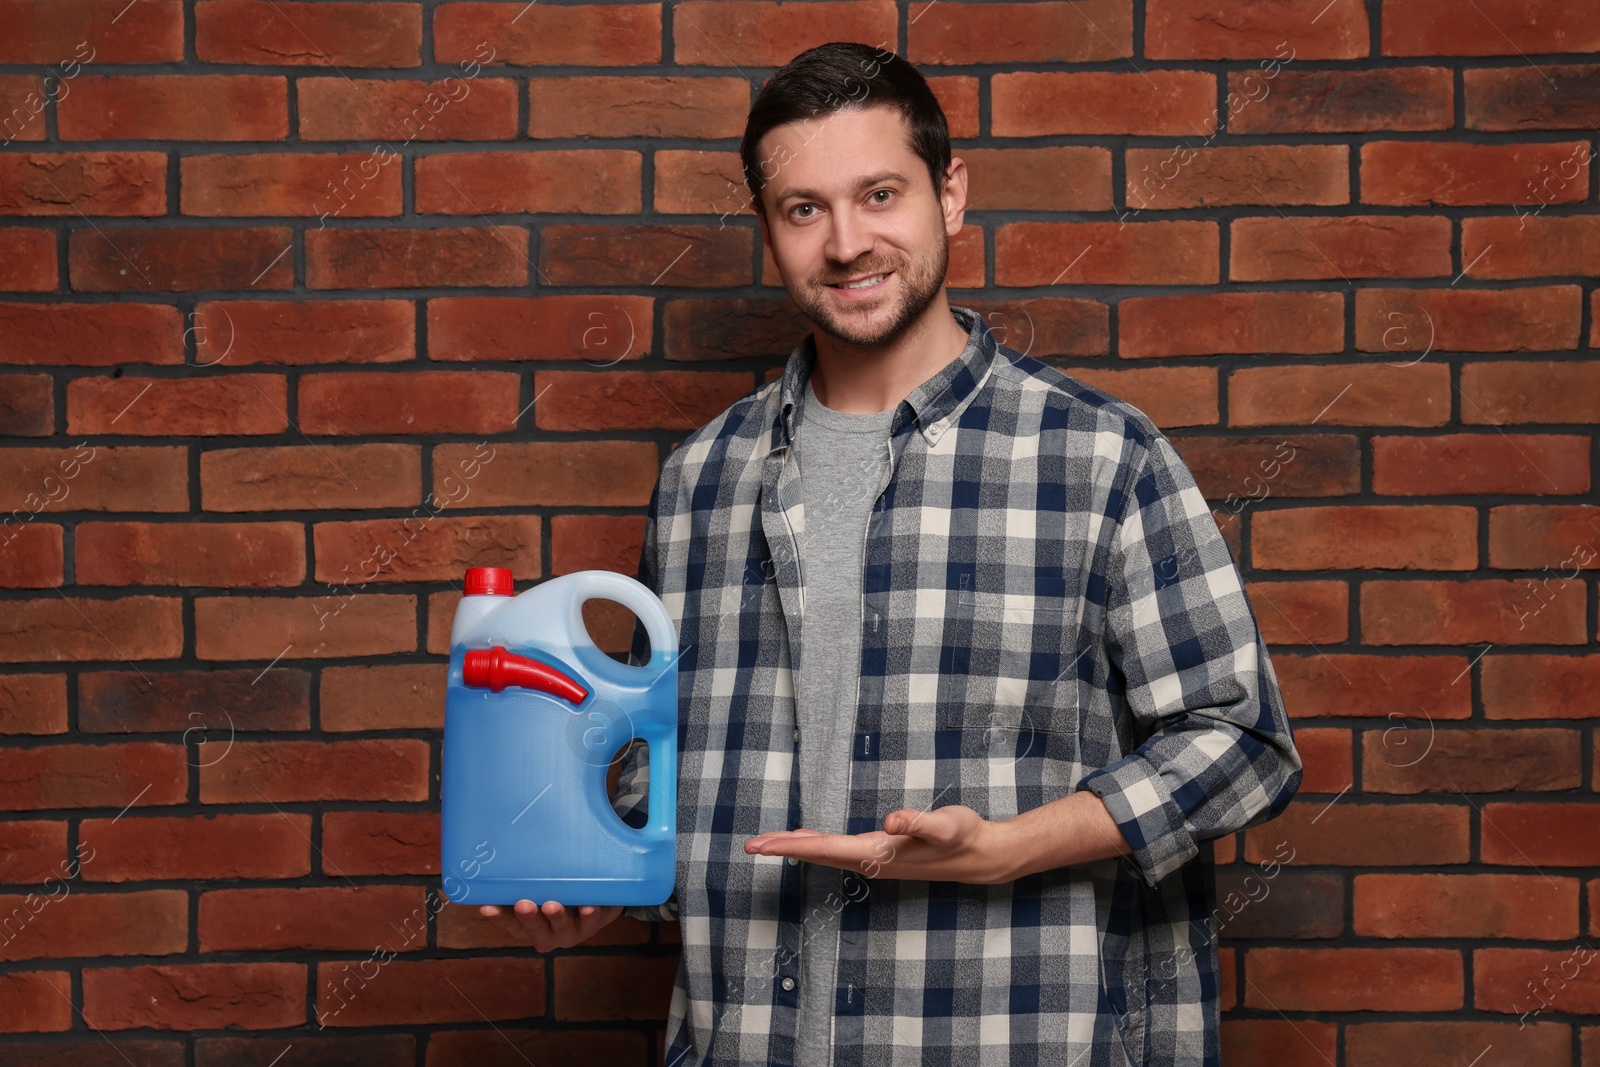 Photo of Handsome man showing canister with blue liquid near brick wall